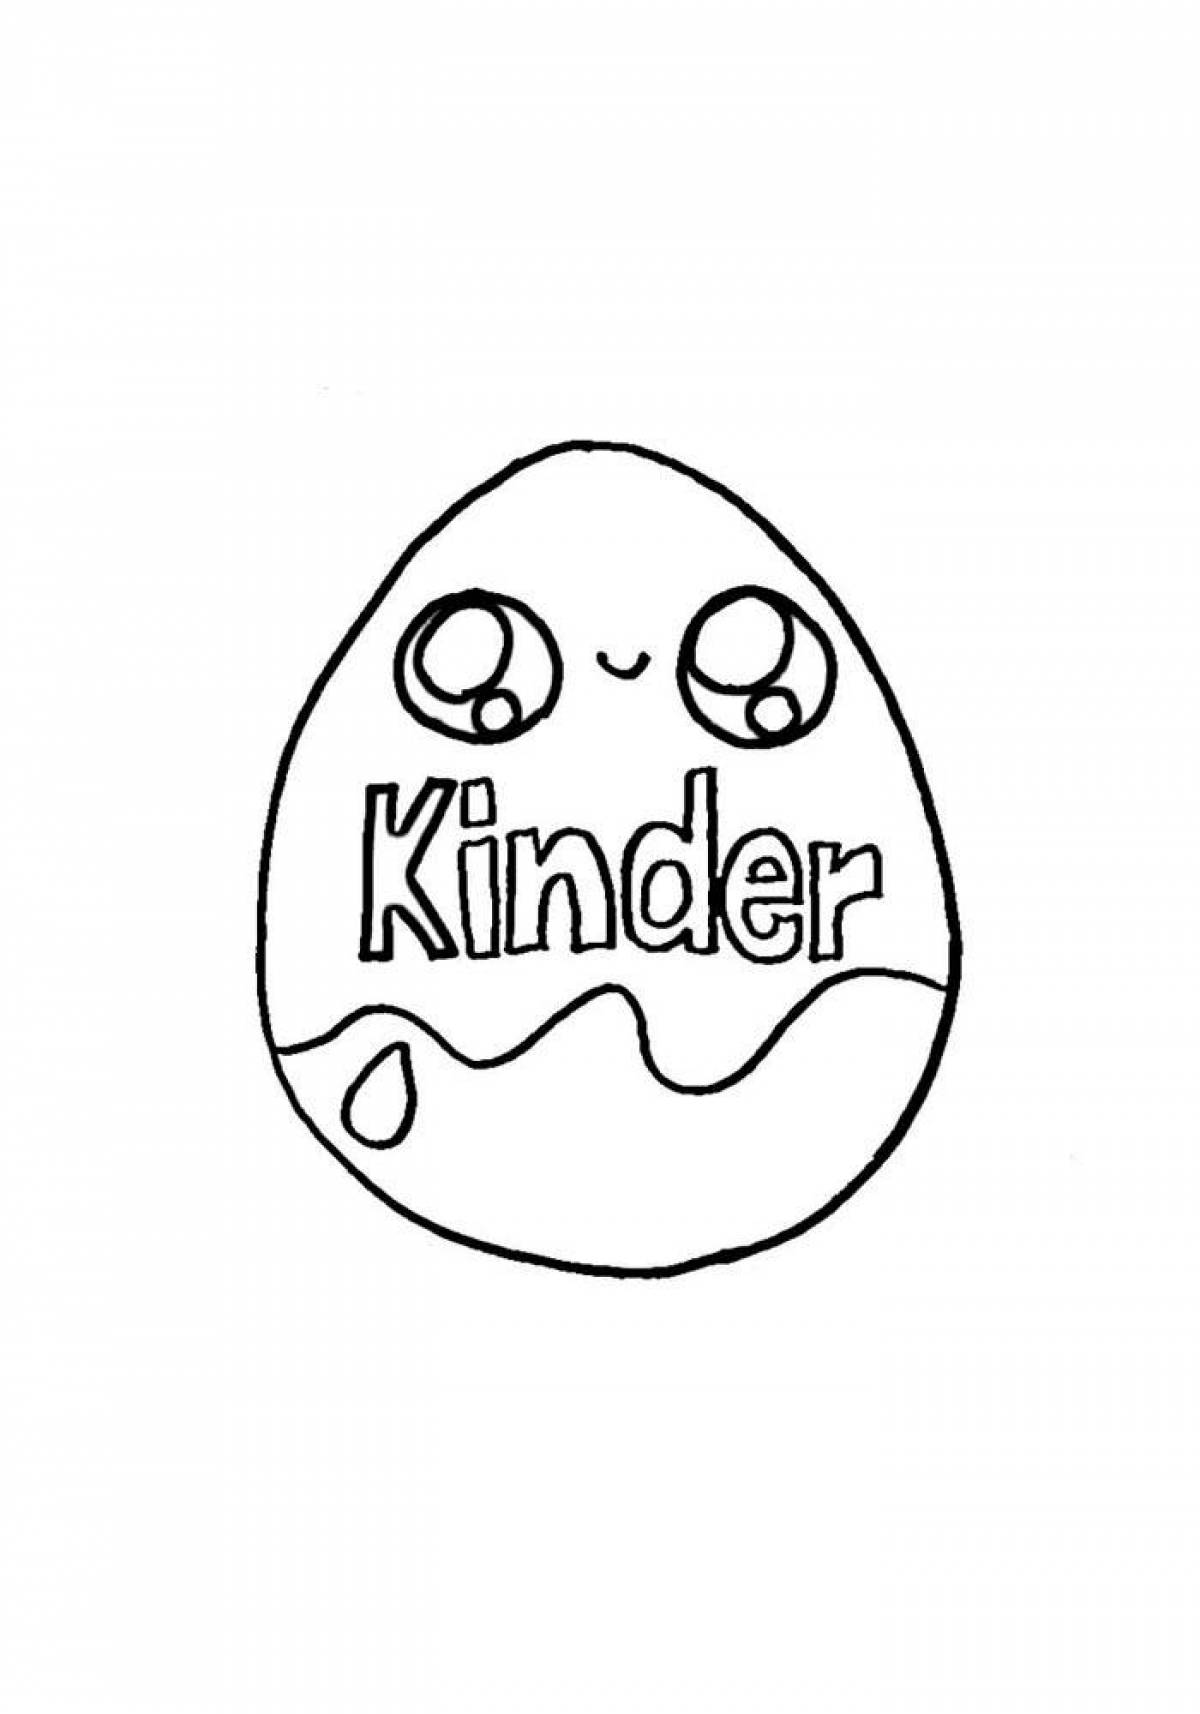 Color-creative kinder coloring page